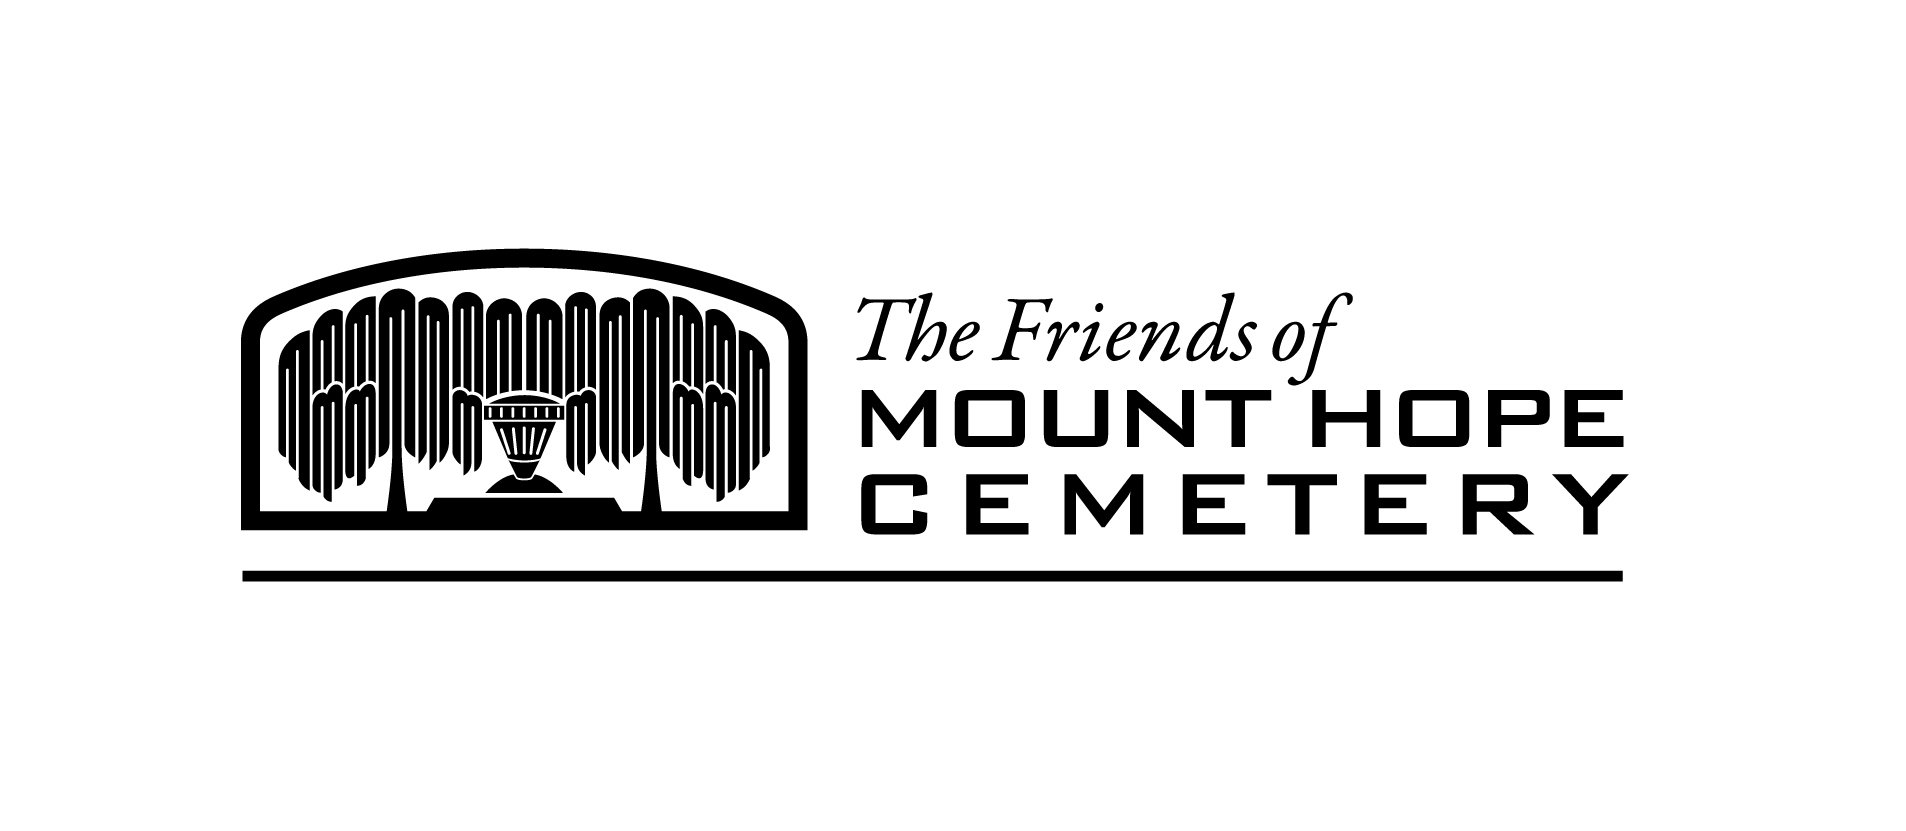 The Friends of Mt. Hope Cemetery